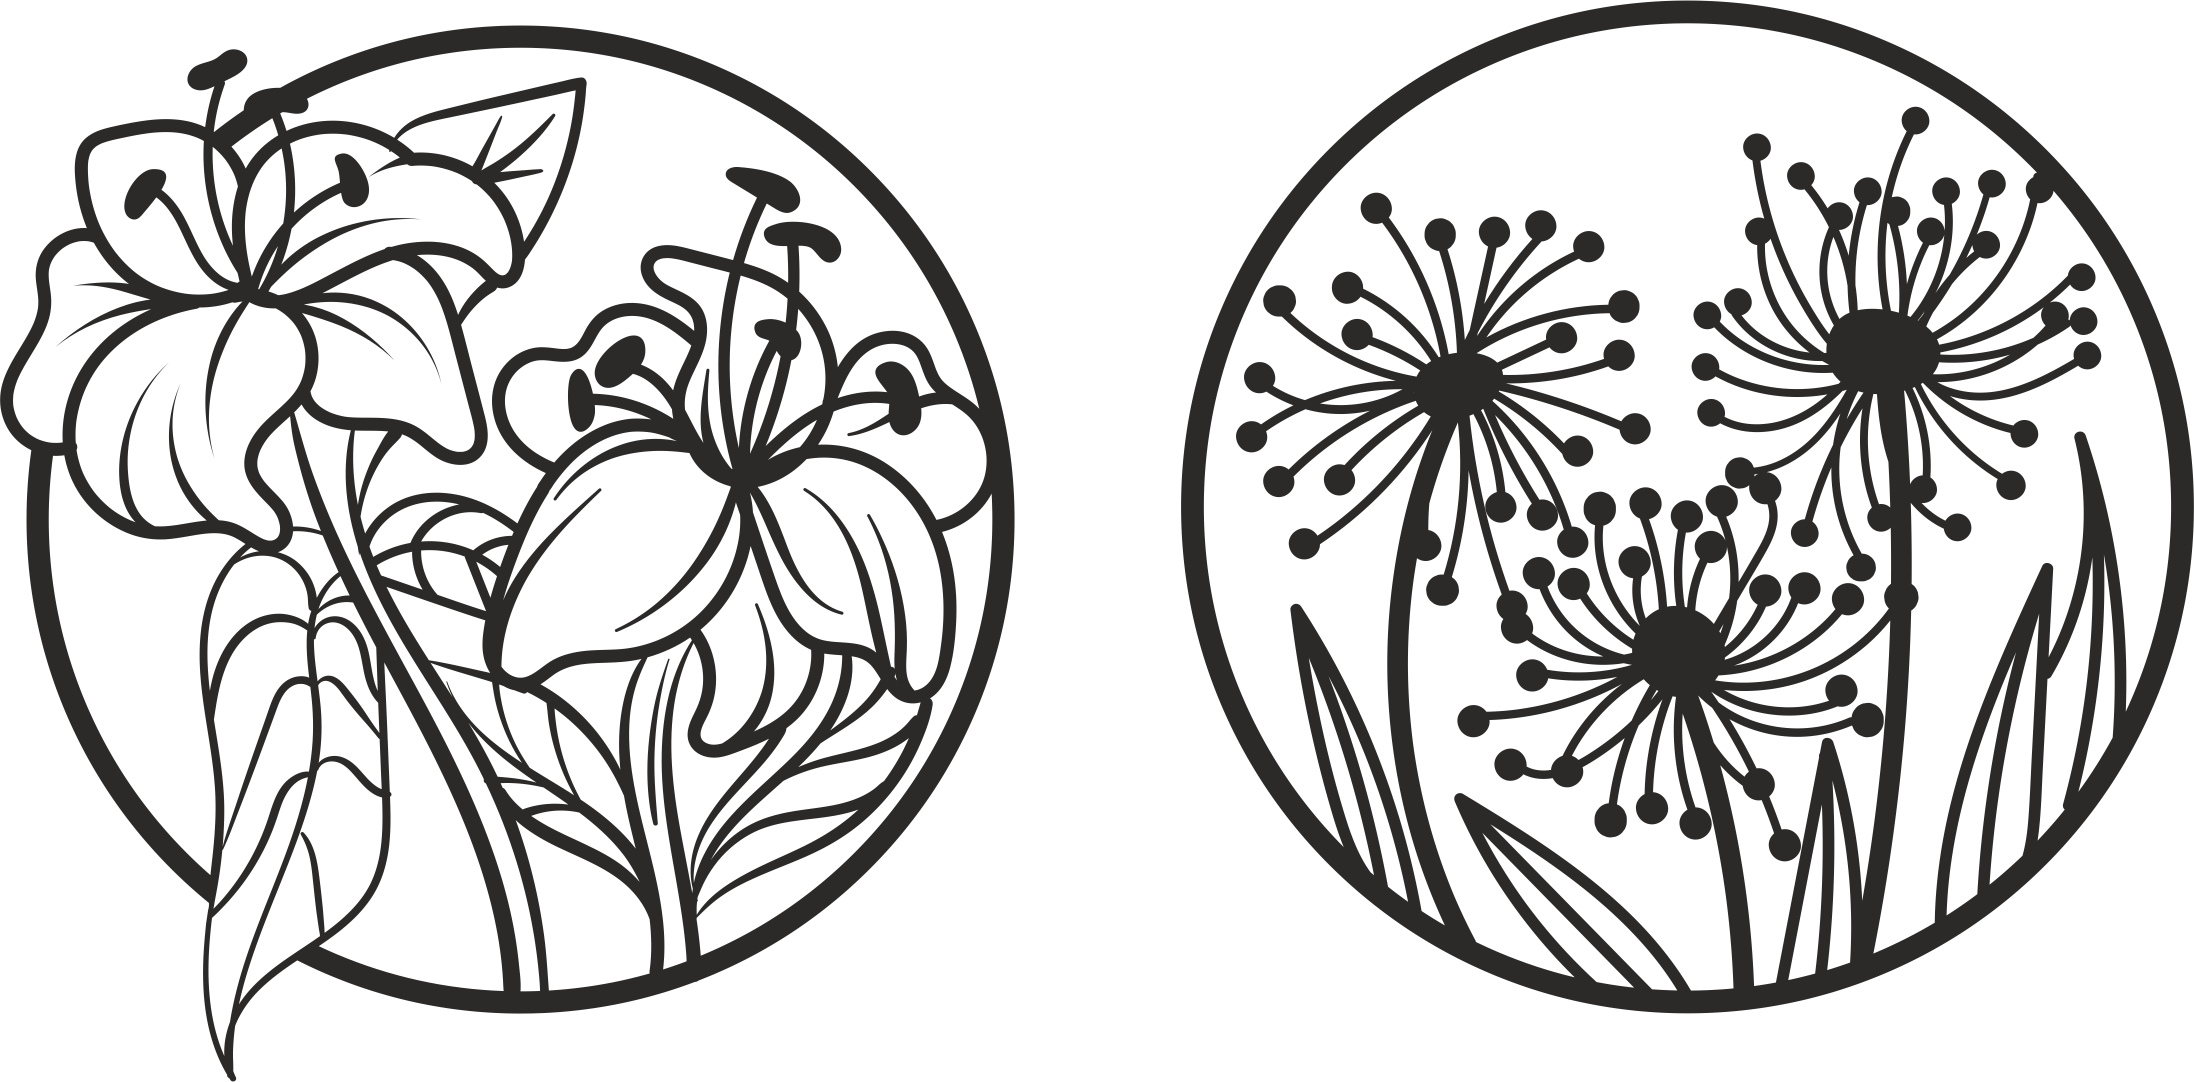 Download Laser Cut Engraving Floral Designs Free Vector cdr Download - 3axis.co